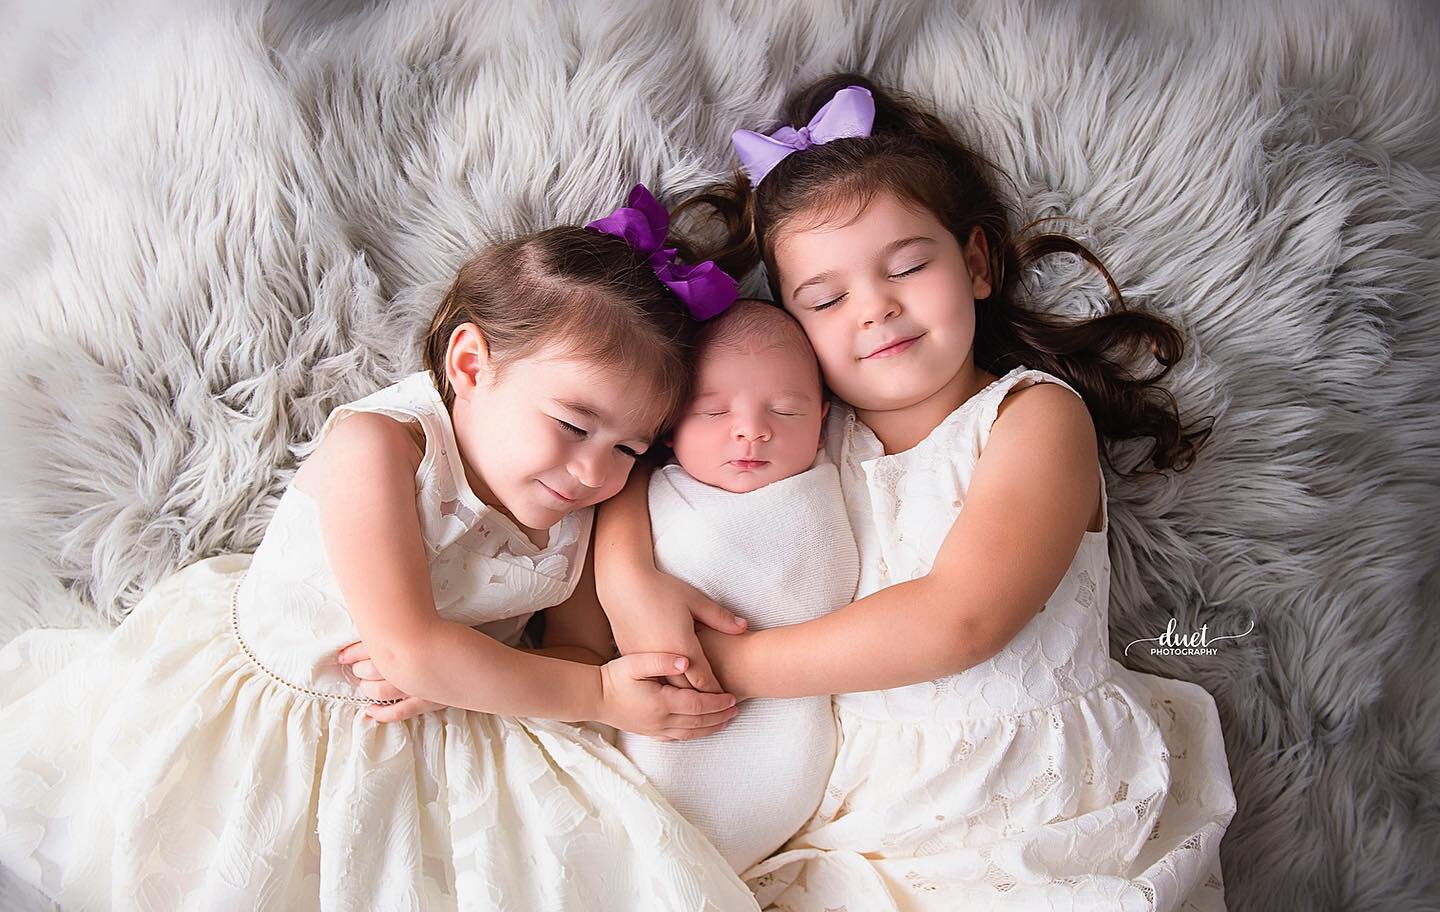 I hope your Sunday is as sweet as these 3! Can you tell how much Savannah &amp; Addison love their new baby brother, Levi?!
.
.
.
#newborn #newborns #newbornboy #newbornbaby #newbornbabies #newbornphoto #newbornphotos #newbornphotography #newbornphot